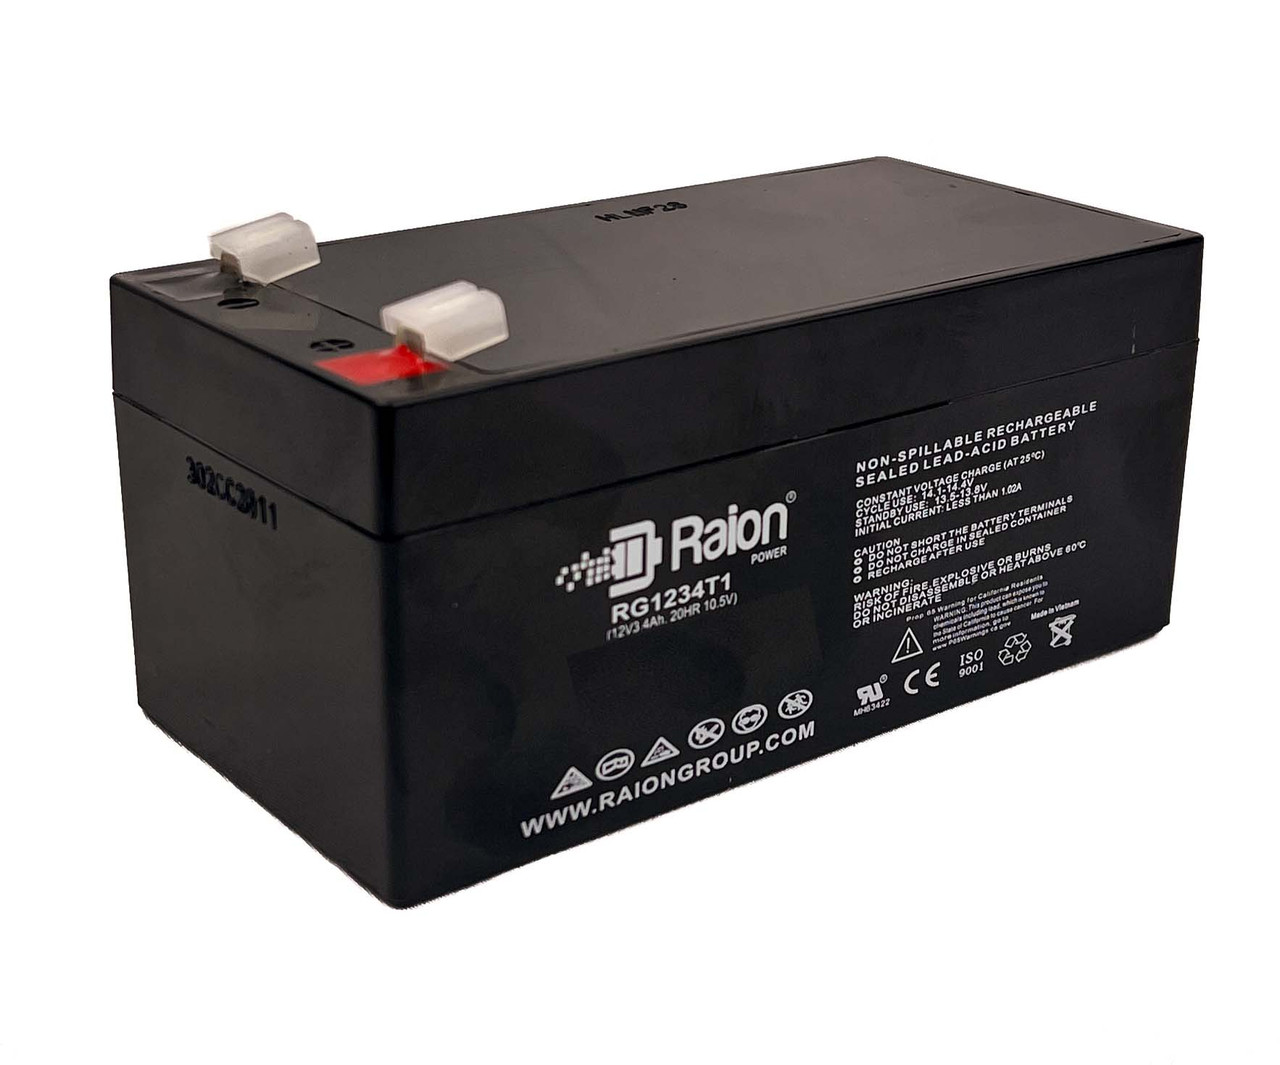 Raion Power 12V 3.4Ah Non-Spillable Replacement Battery for Delta DT 12032